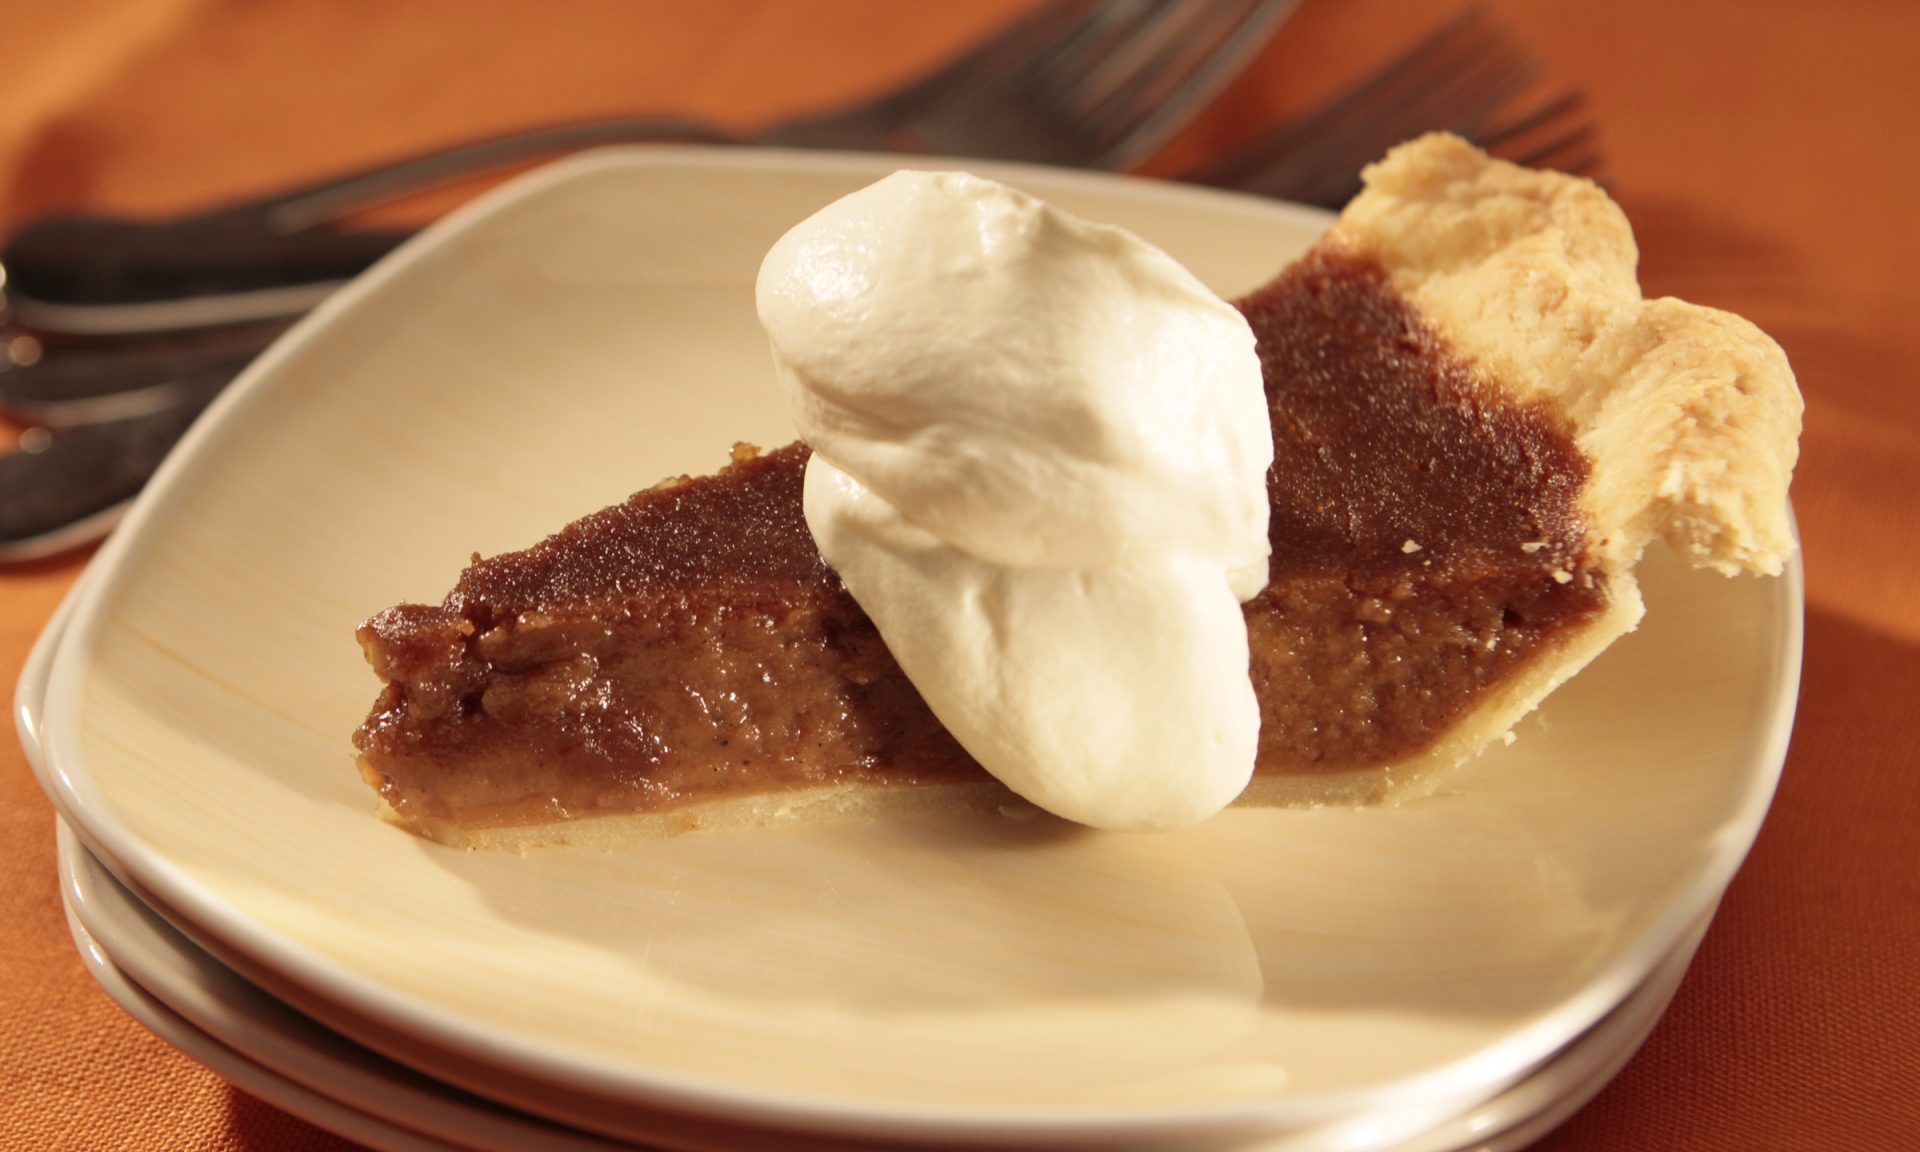 Four Sweet Potato Desserts You MUST Try This Holiday Season